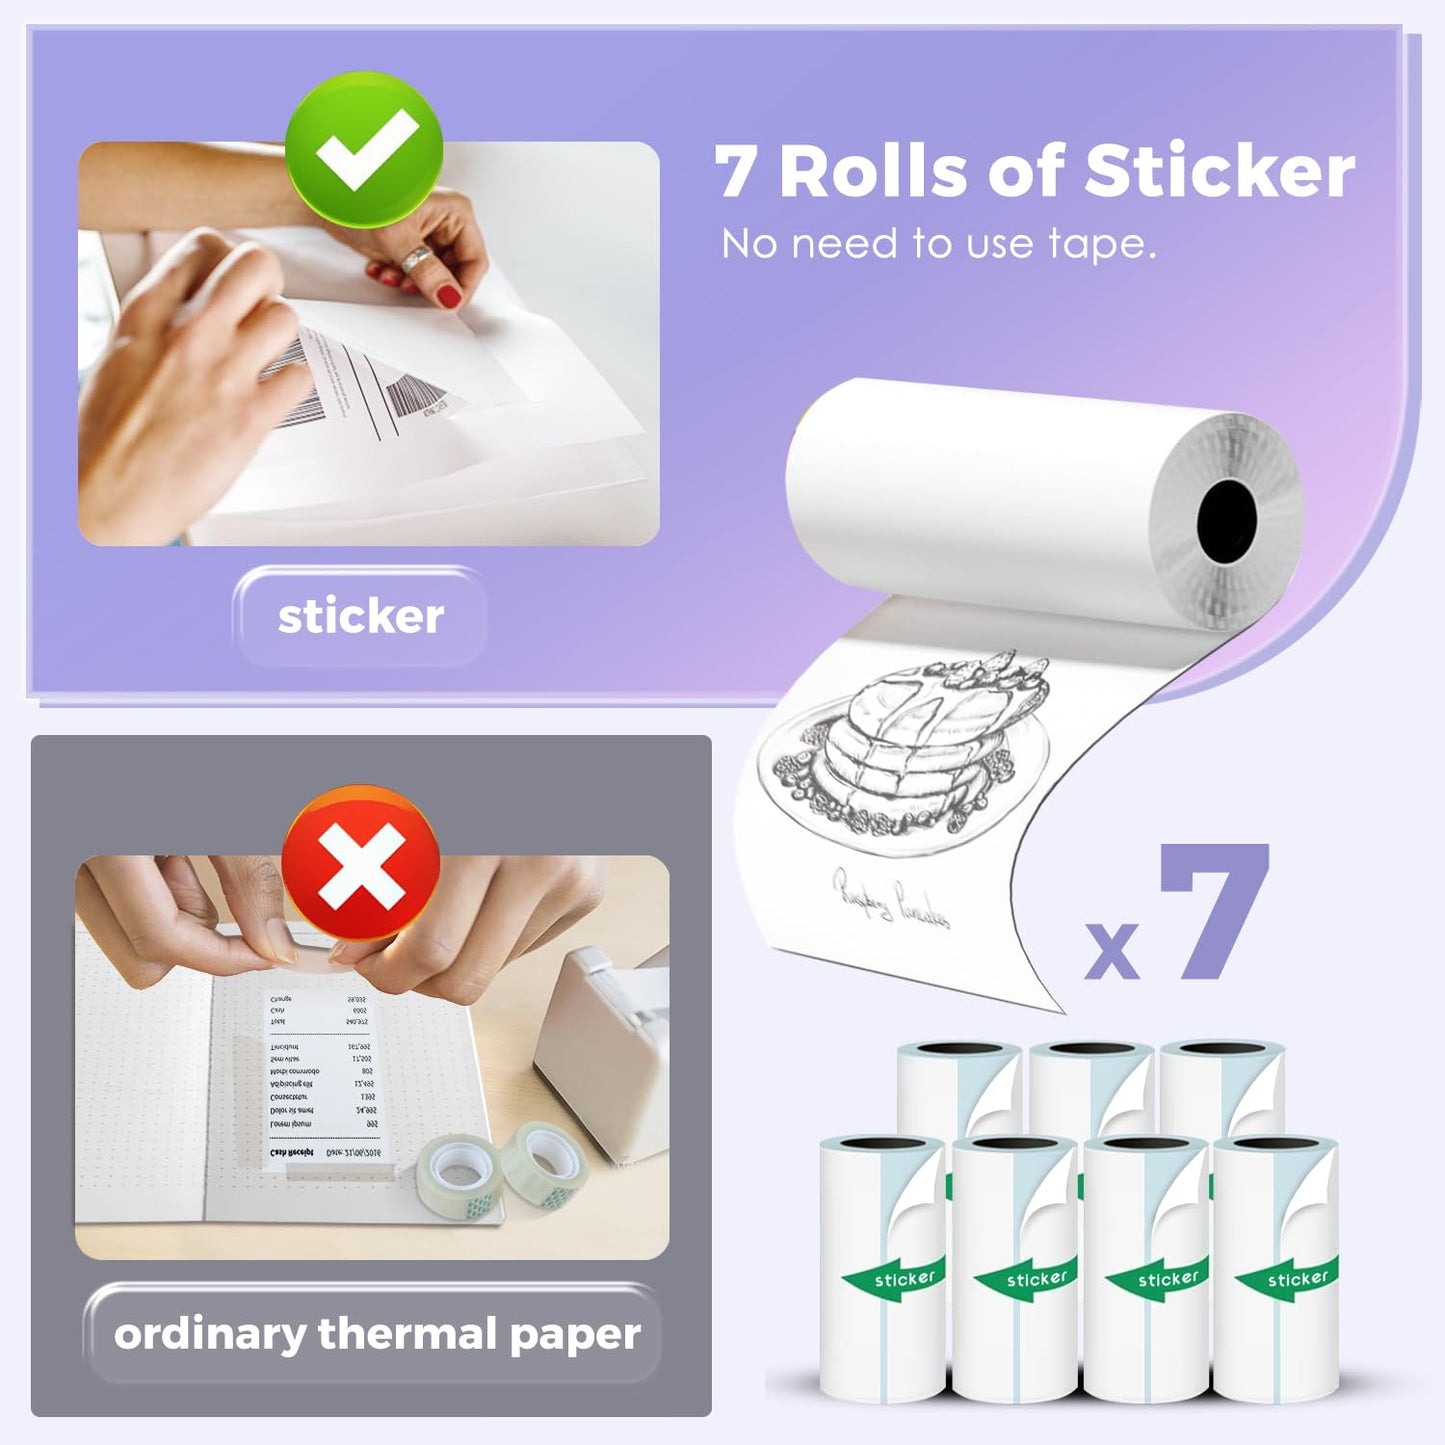 Mini Printer with 7 Rolls Sticker Paper, Receipt Sticker Printer Efficiently and Quickly, Receipt Printer for Study Notes, Pictures, DIY, Label, Free App with Multiple Templates-Printer-01